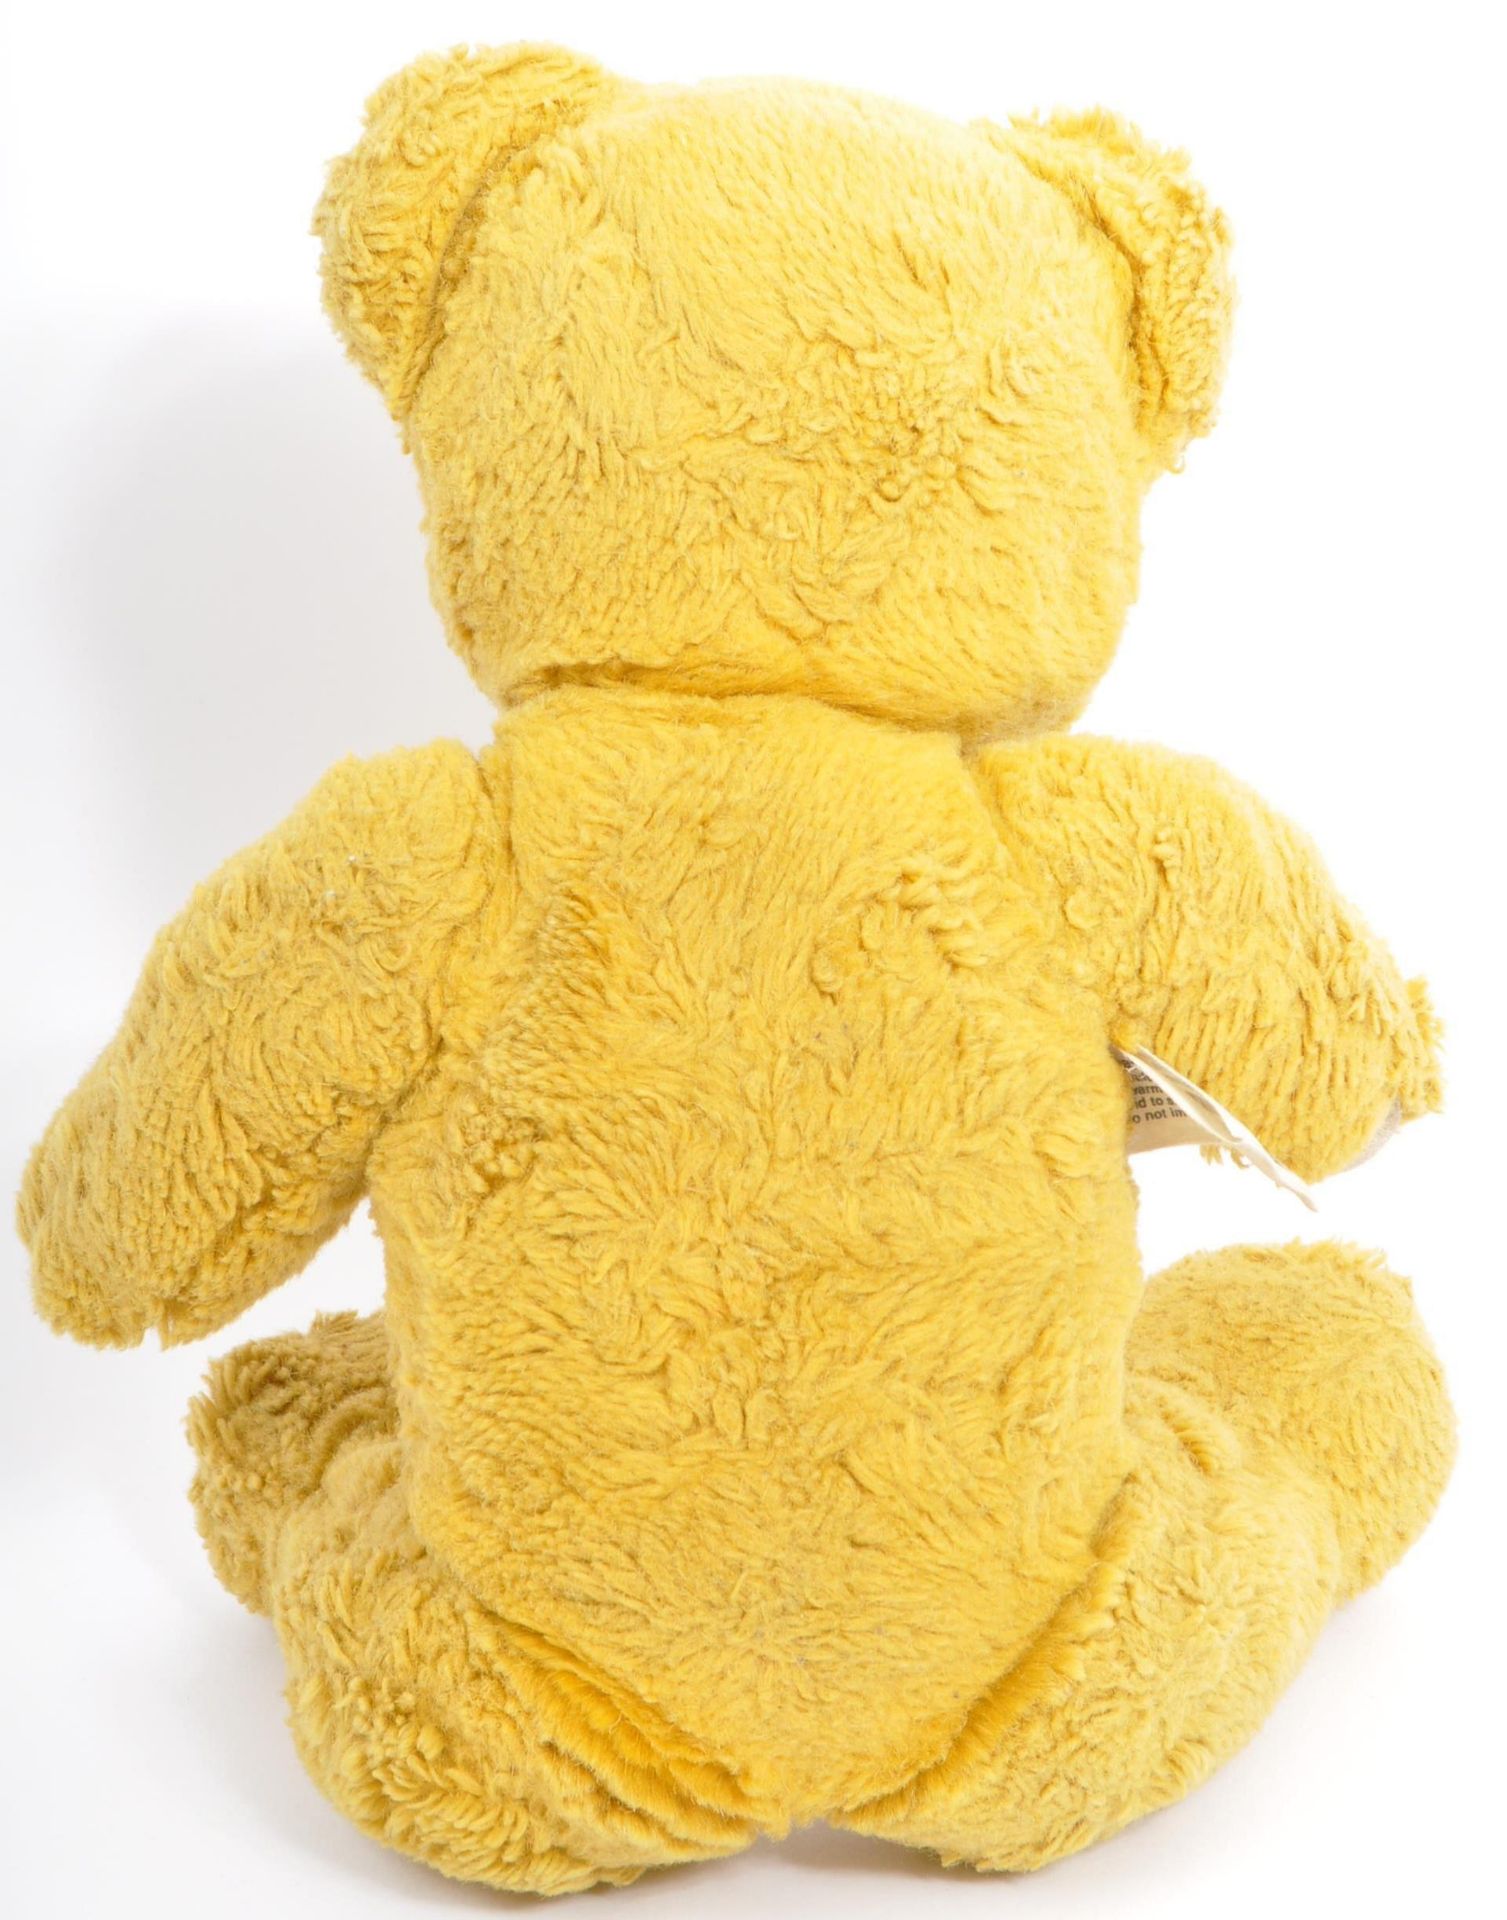 VINTAGE MERRYTHOUGHT SOFT TOY TEDDY BEAR - Image 3 of 6